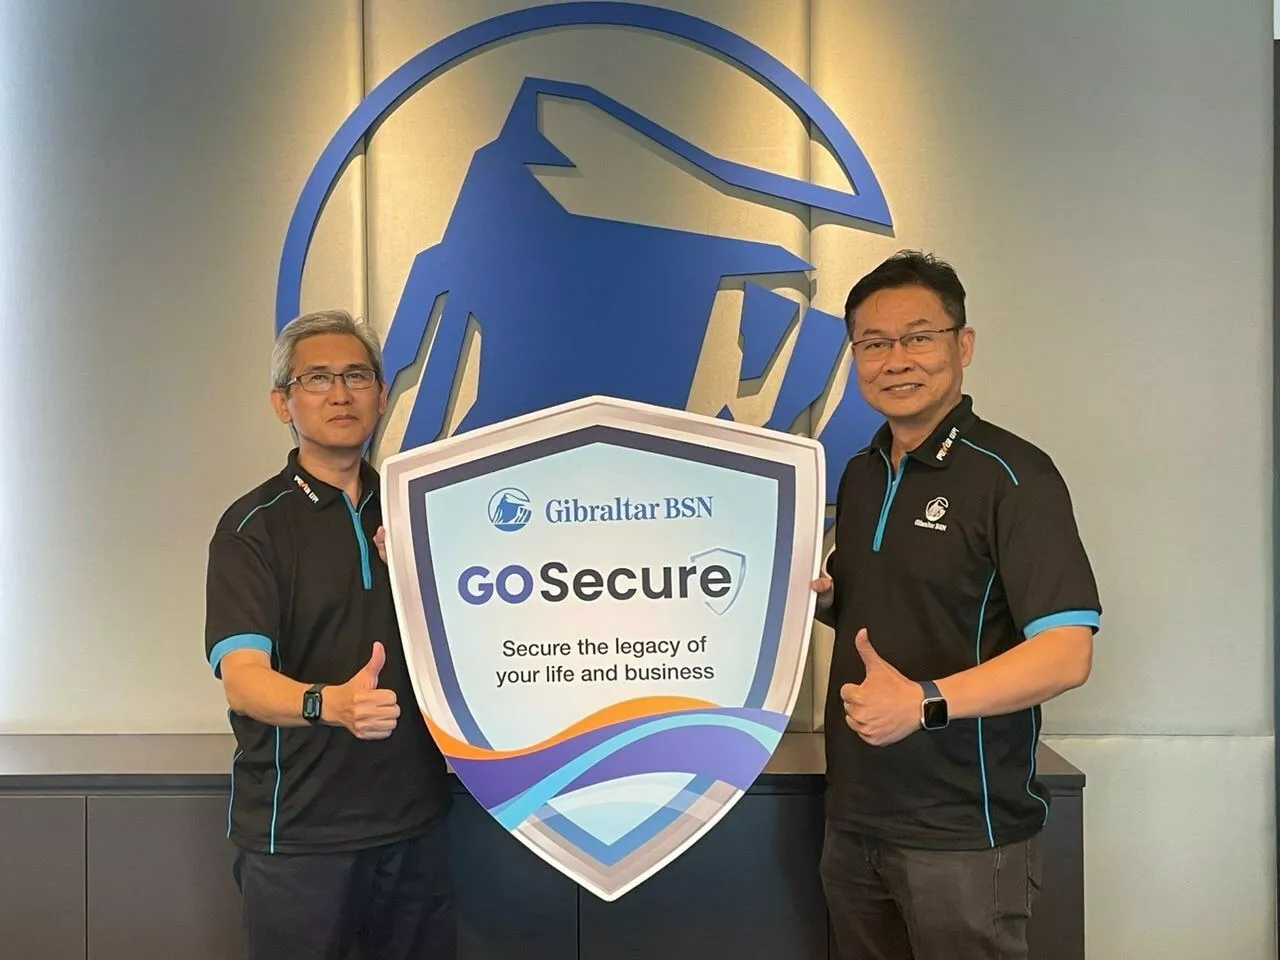 (from left to right) Lee Kok Wah, Chief Executive Officer of Gibraltar BSN and Daniel Toh, Chief Sales Officer of Gibraltar BSN at the launch of GoSecure and GoSecure+ img#1